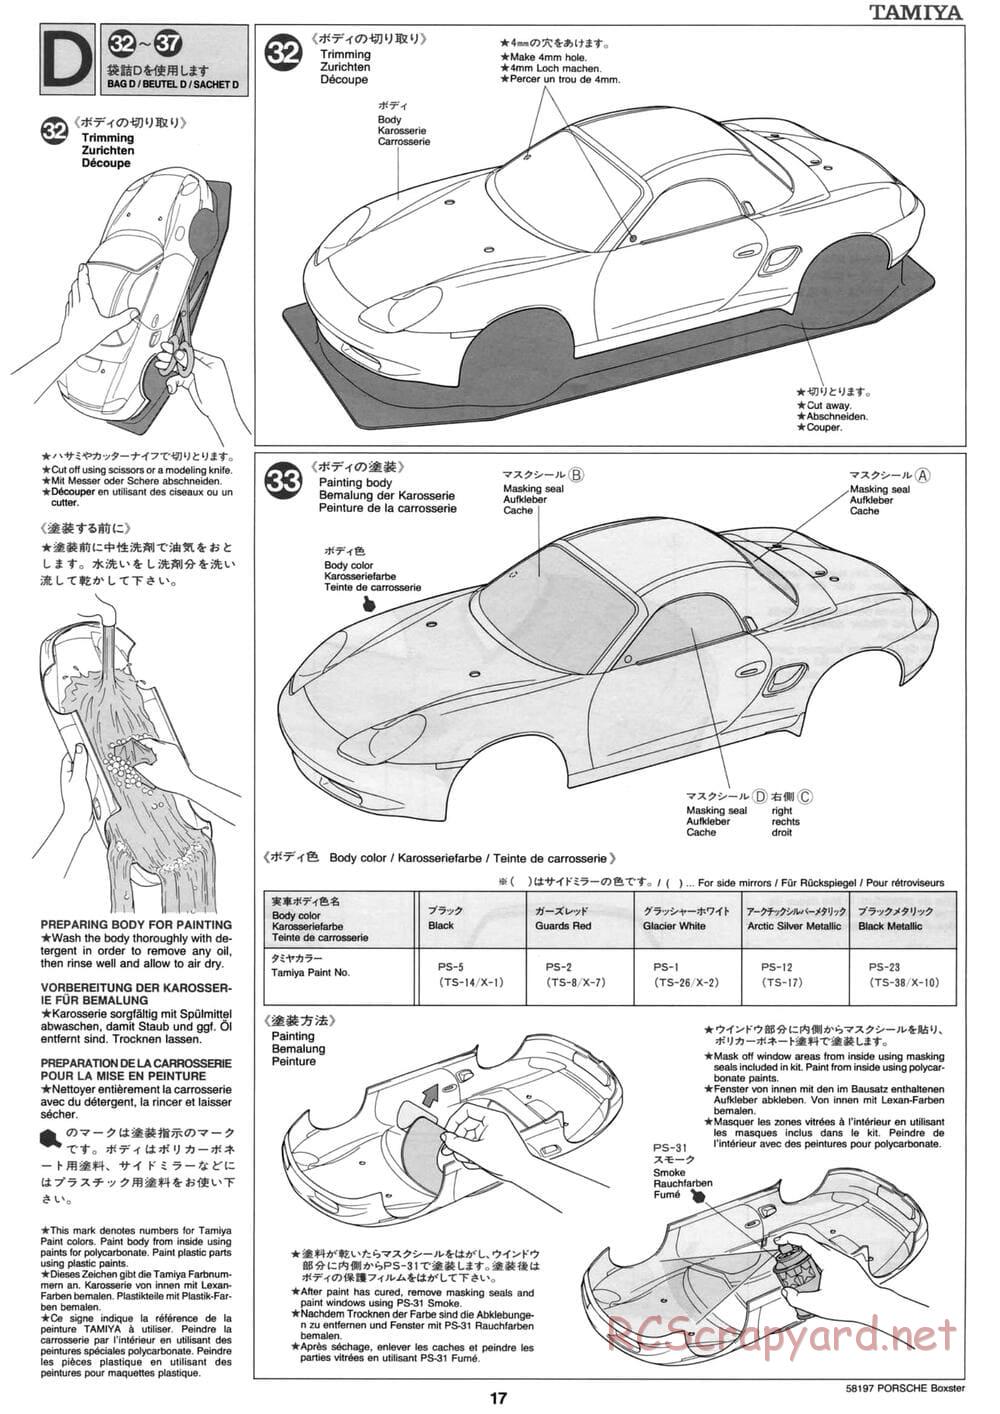 Tamiya - Porsche Boxster - M02L Chassis - Manual - Page 17